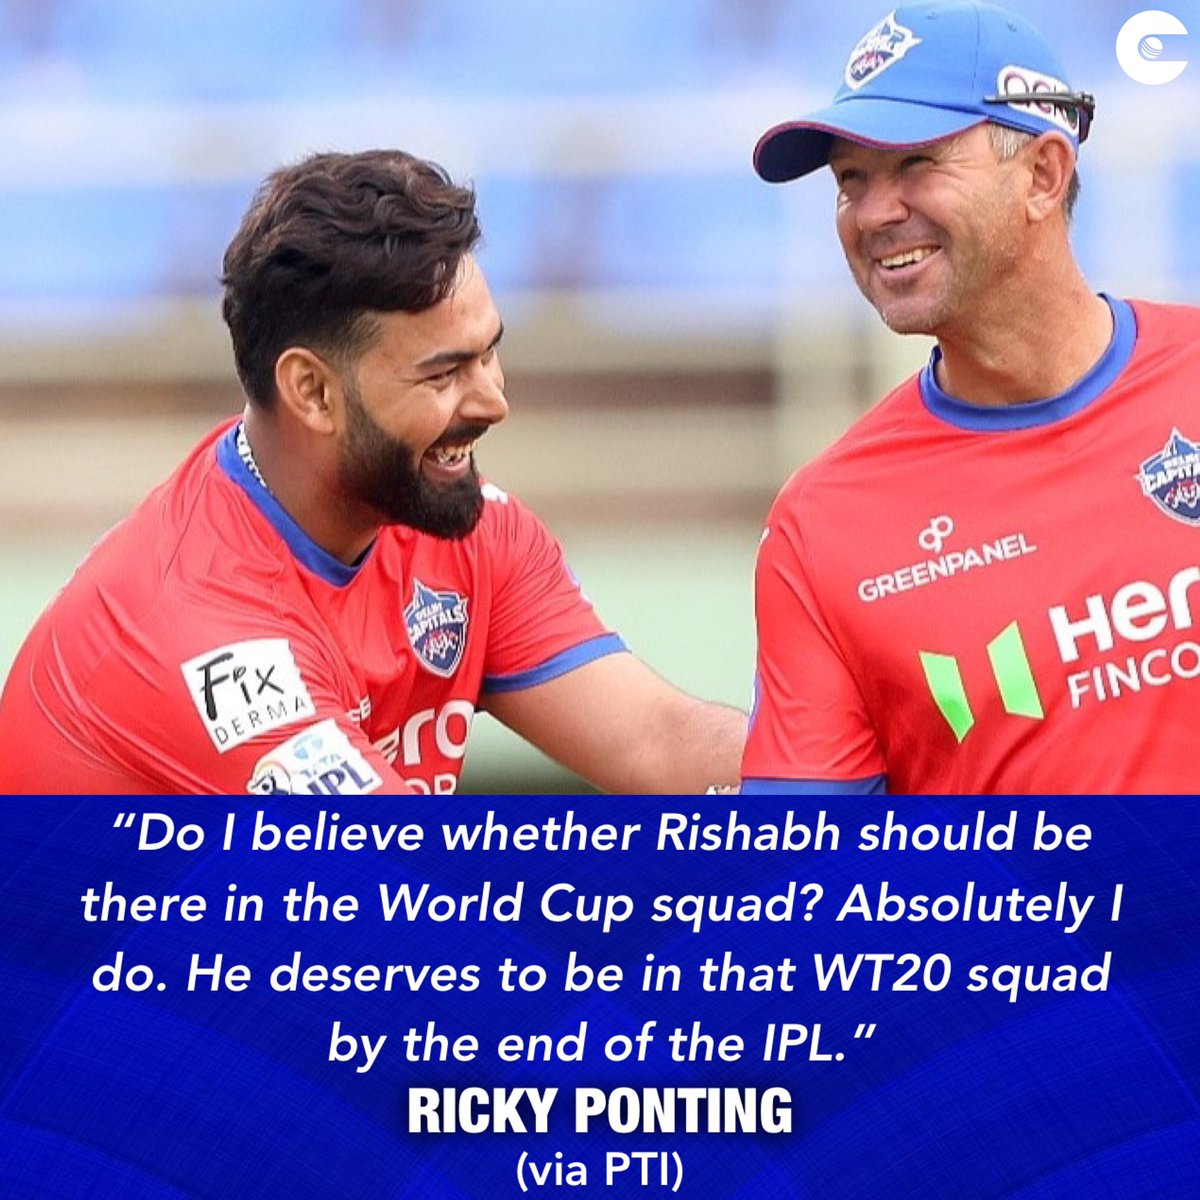 #DelhiCapitals head coach #RickyPonting backs #RishabhPant to play in the #T20WorldCup.

#IPL2024 #DC #TeamIndia